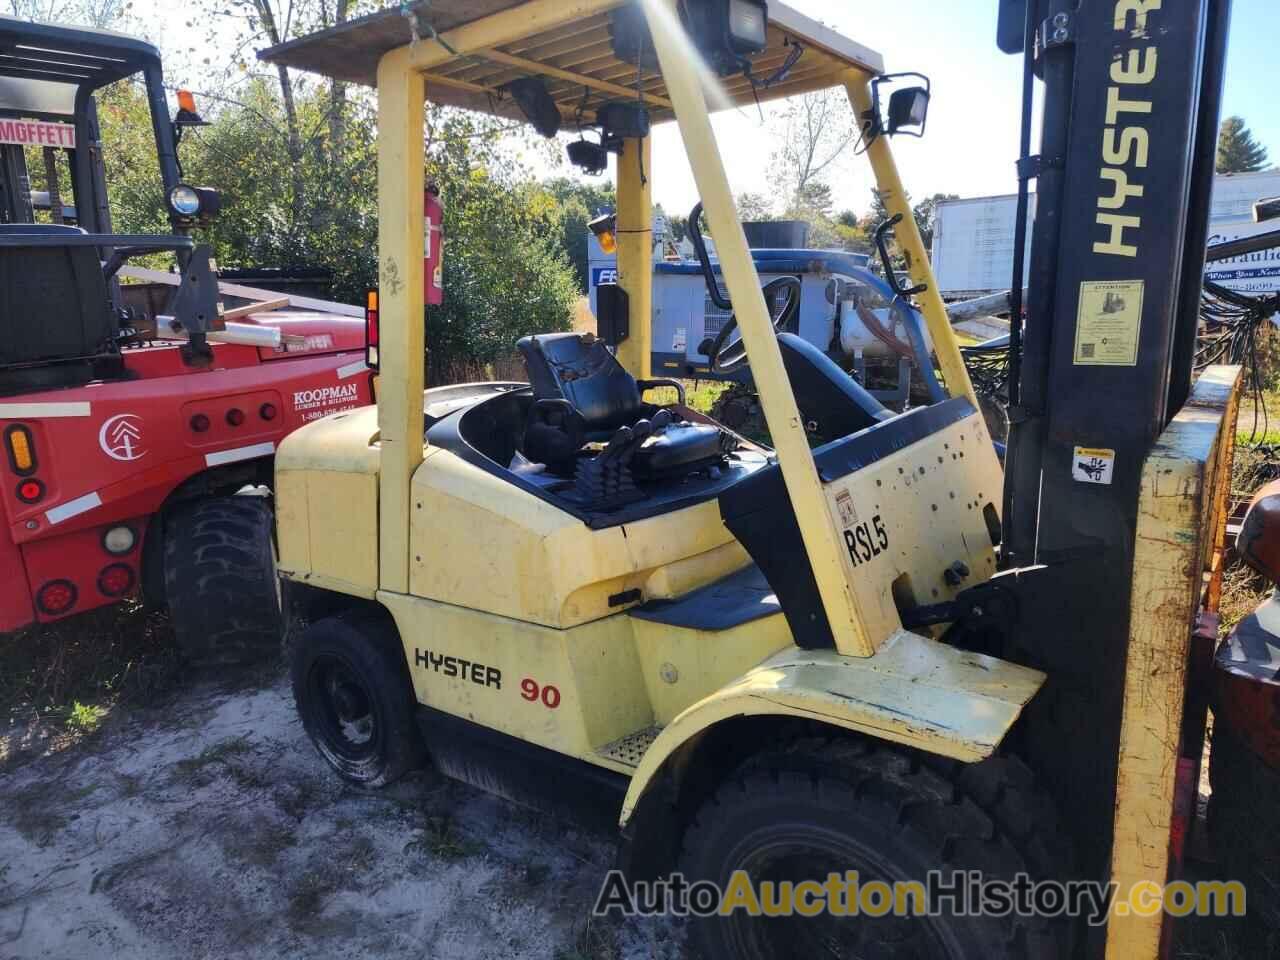 1990 HYST OTHER, 90HYSTER